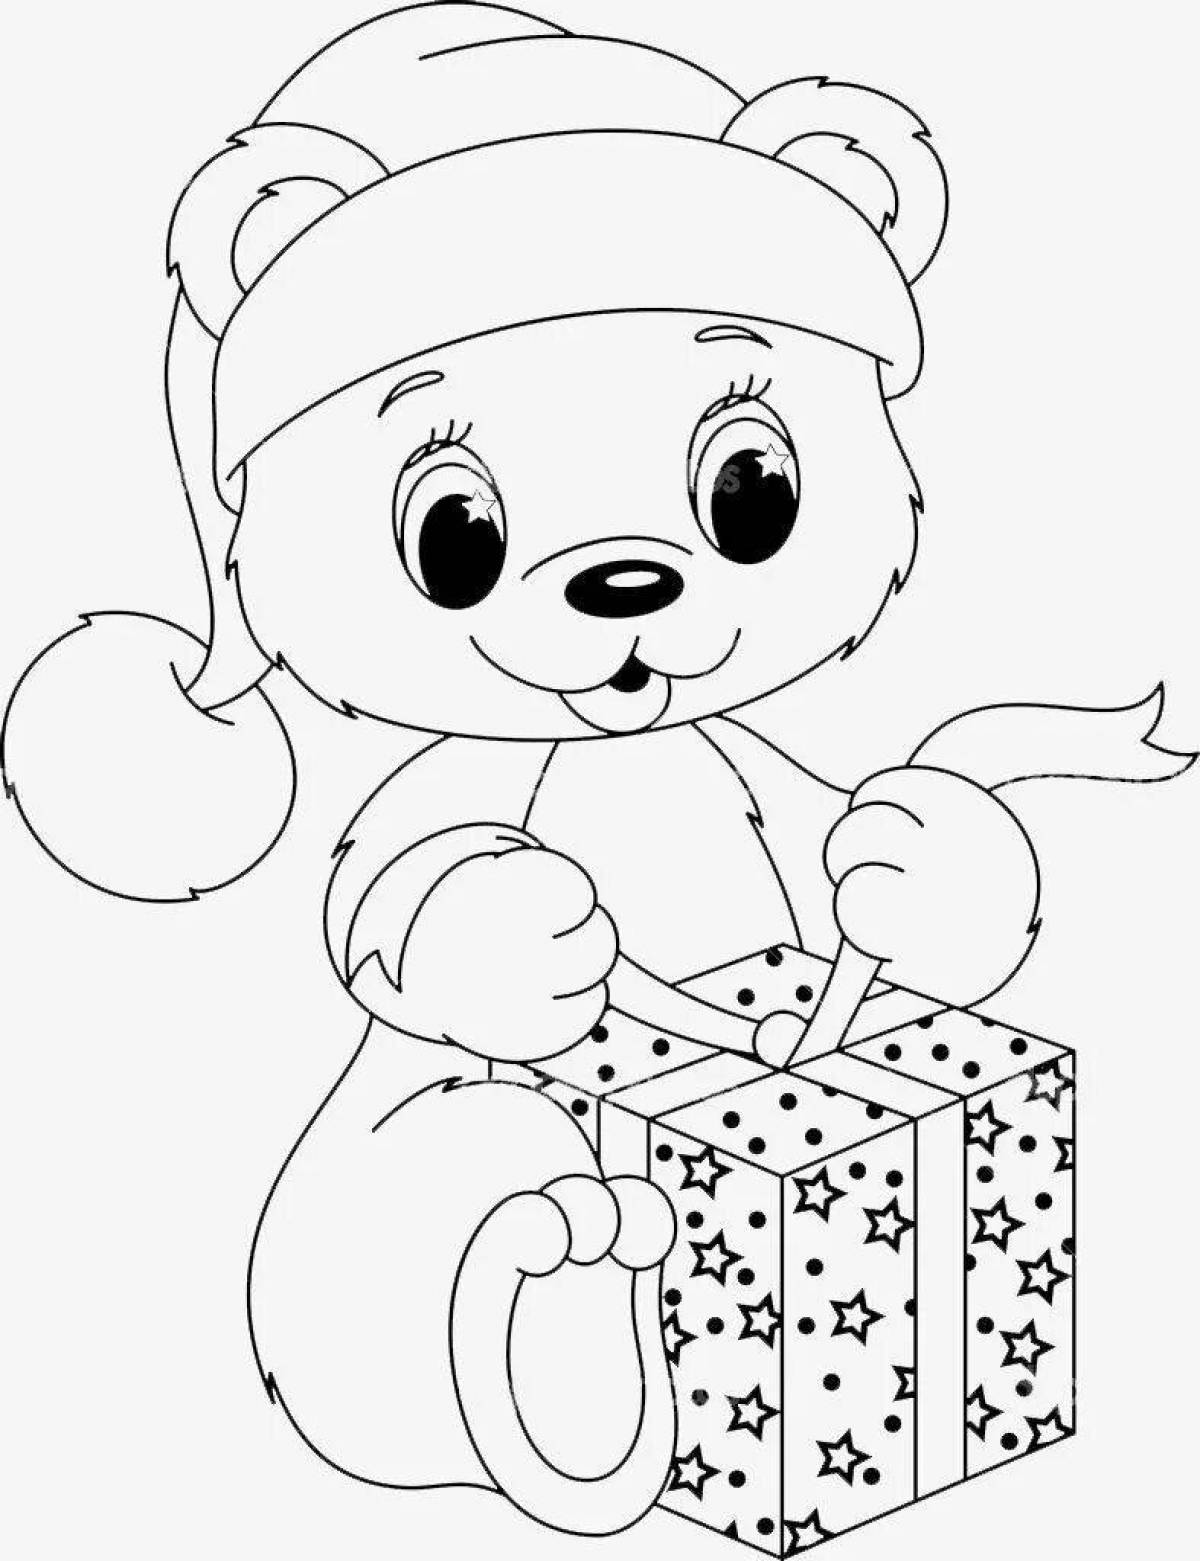 Coloring book smiling bear with a gift